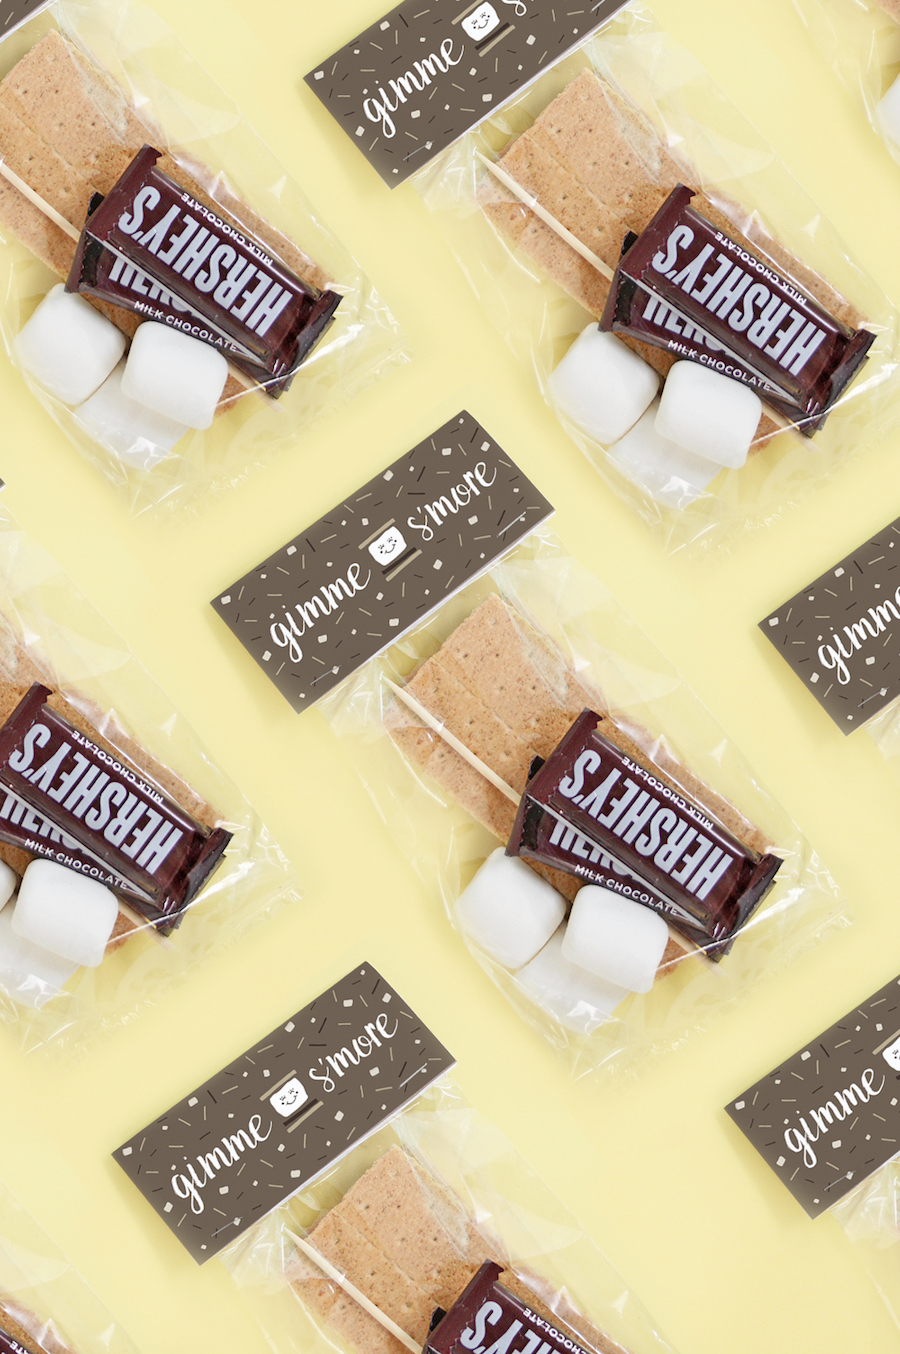 Creative camp care packages: DIY S'mores kits at Club Crafted